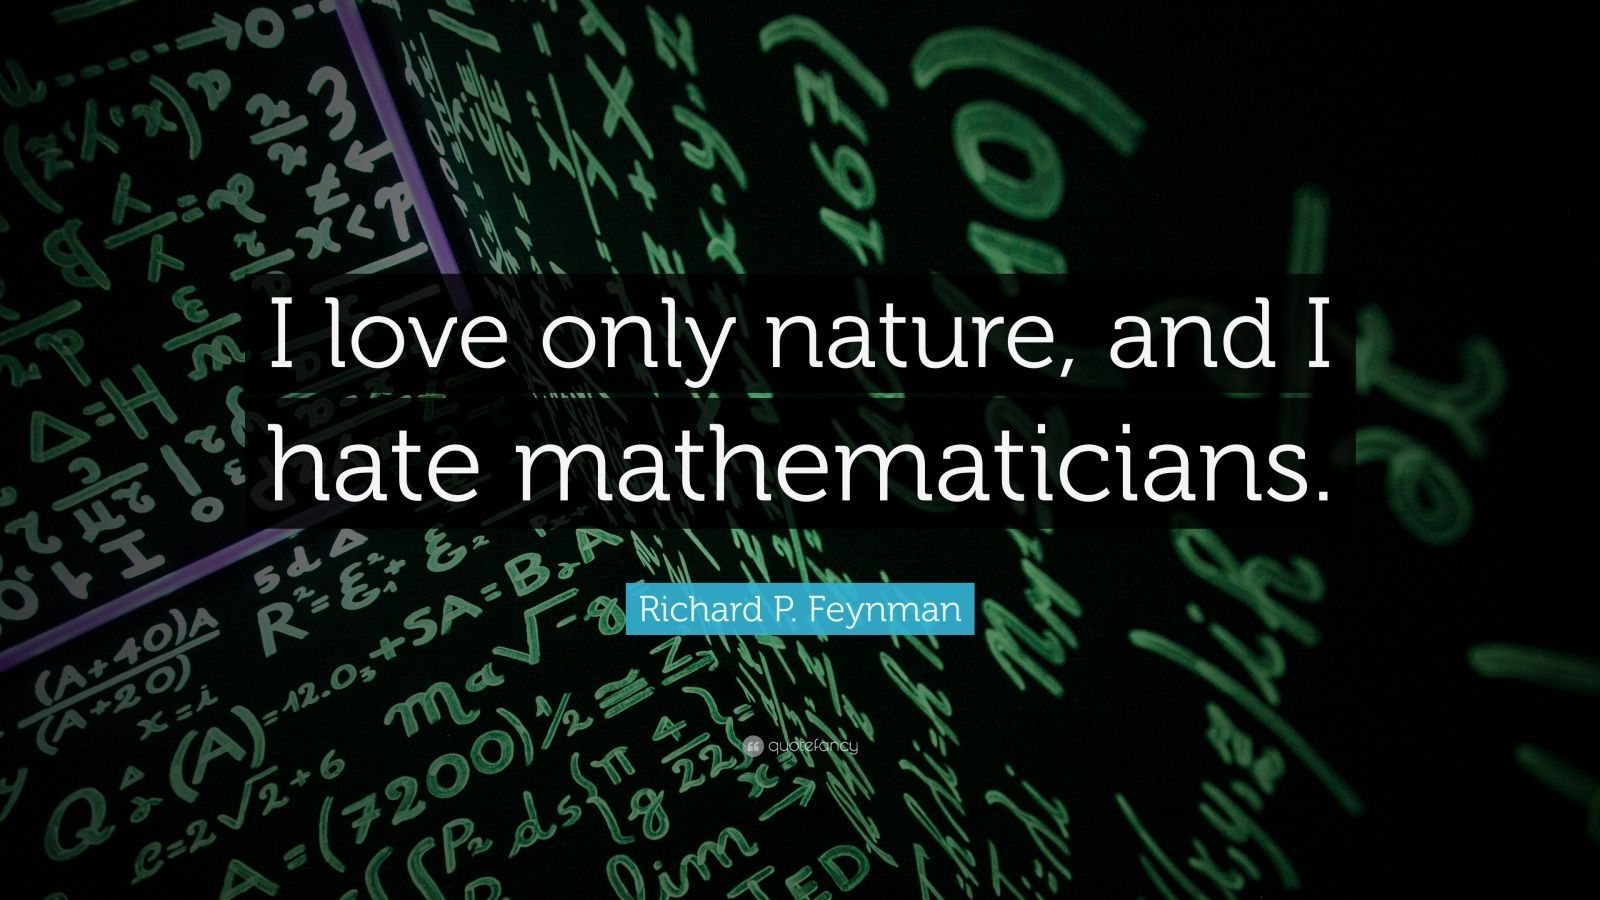 Richard P. Feynman Quote: “I love only nature, and I hate